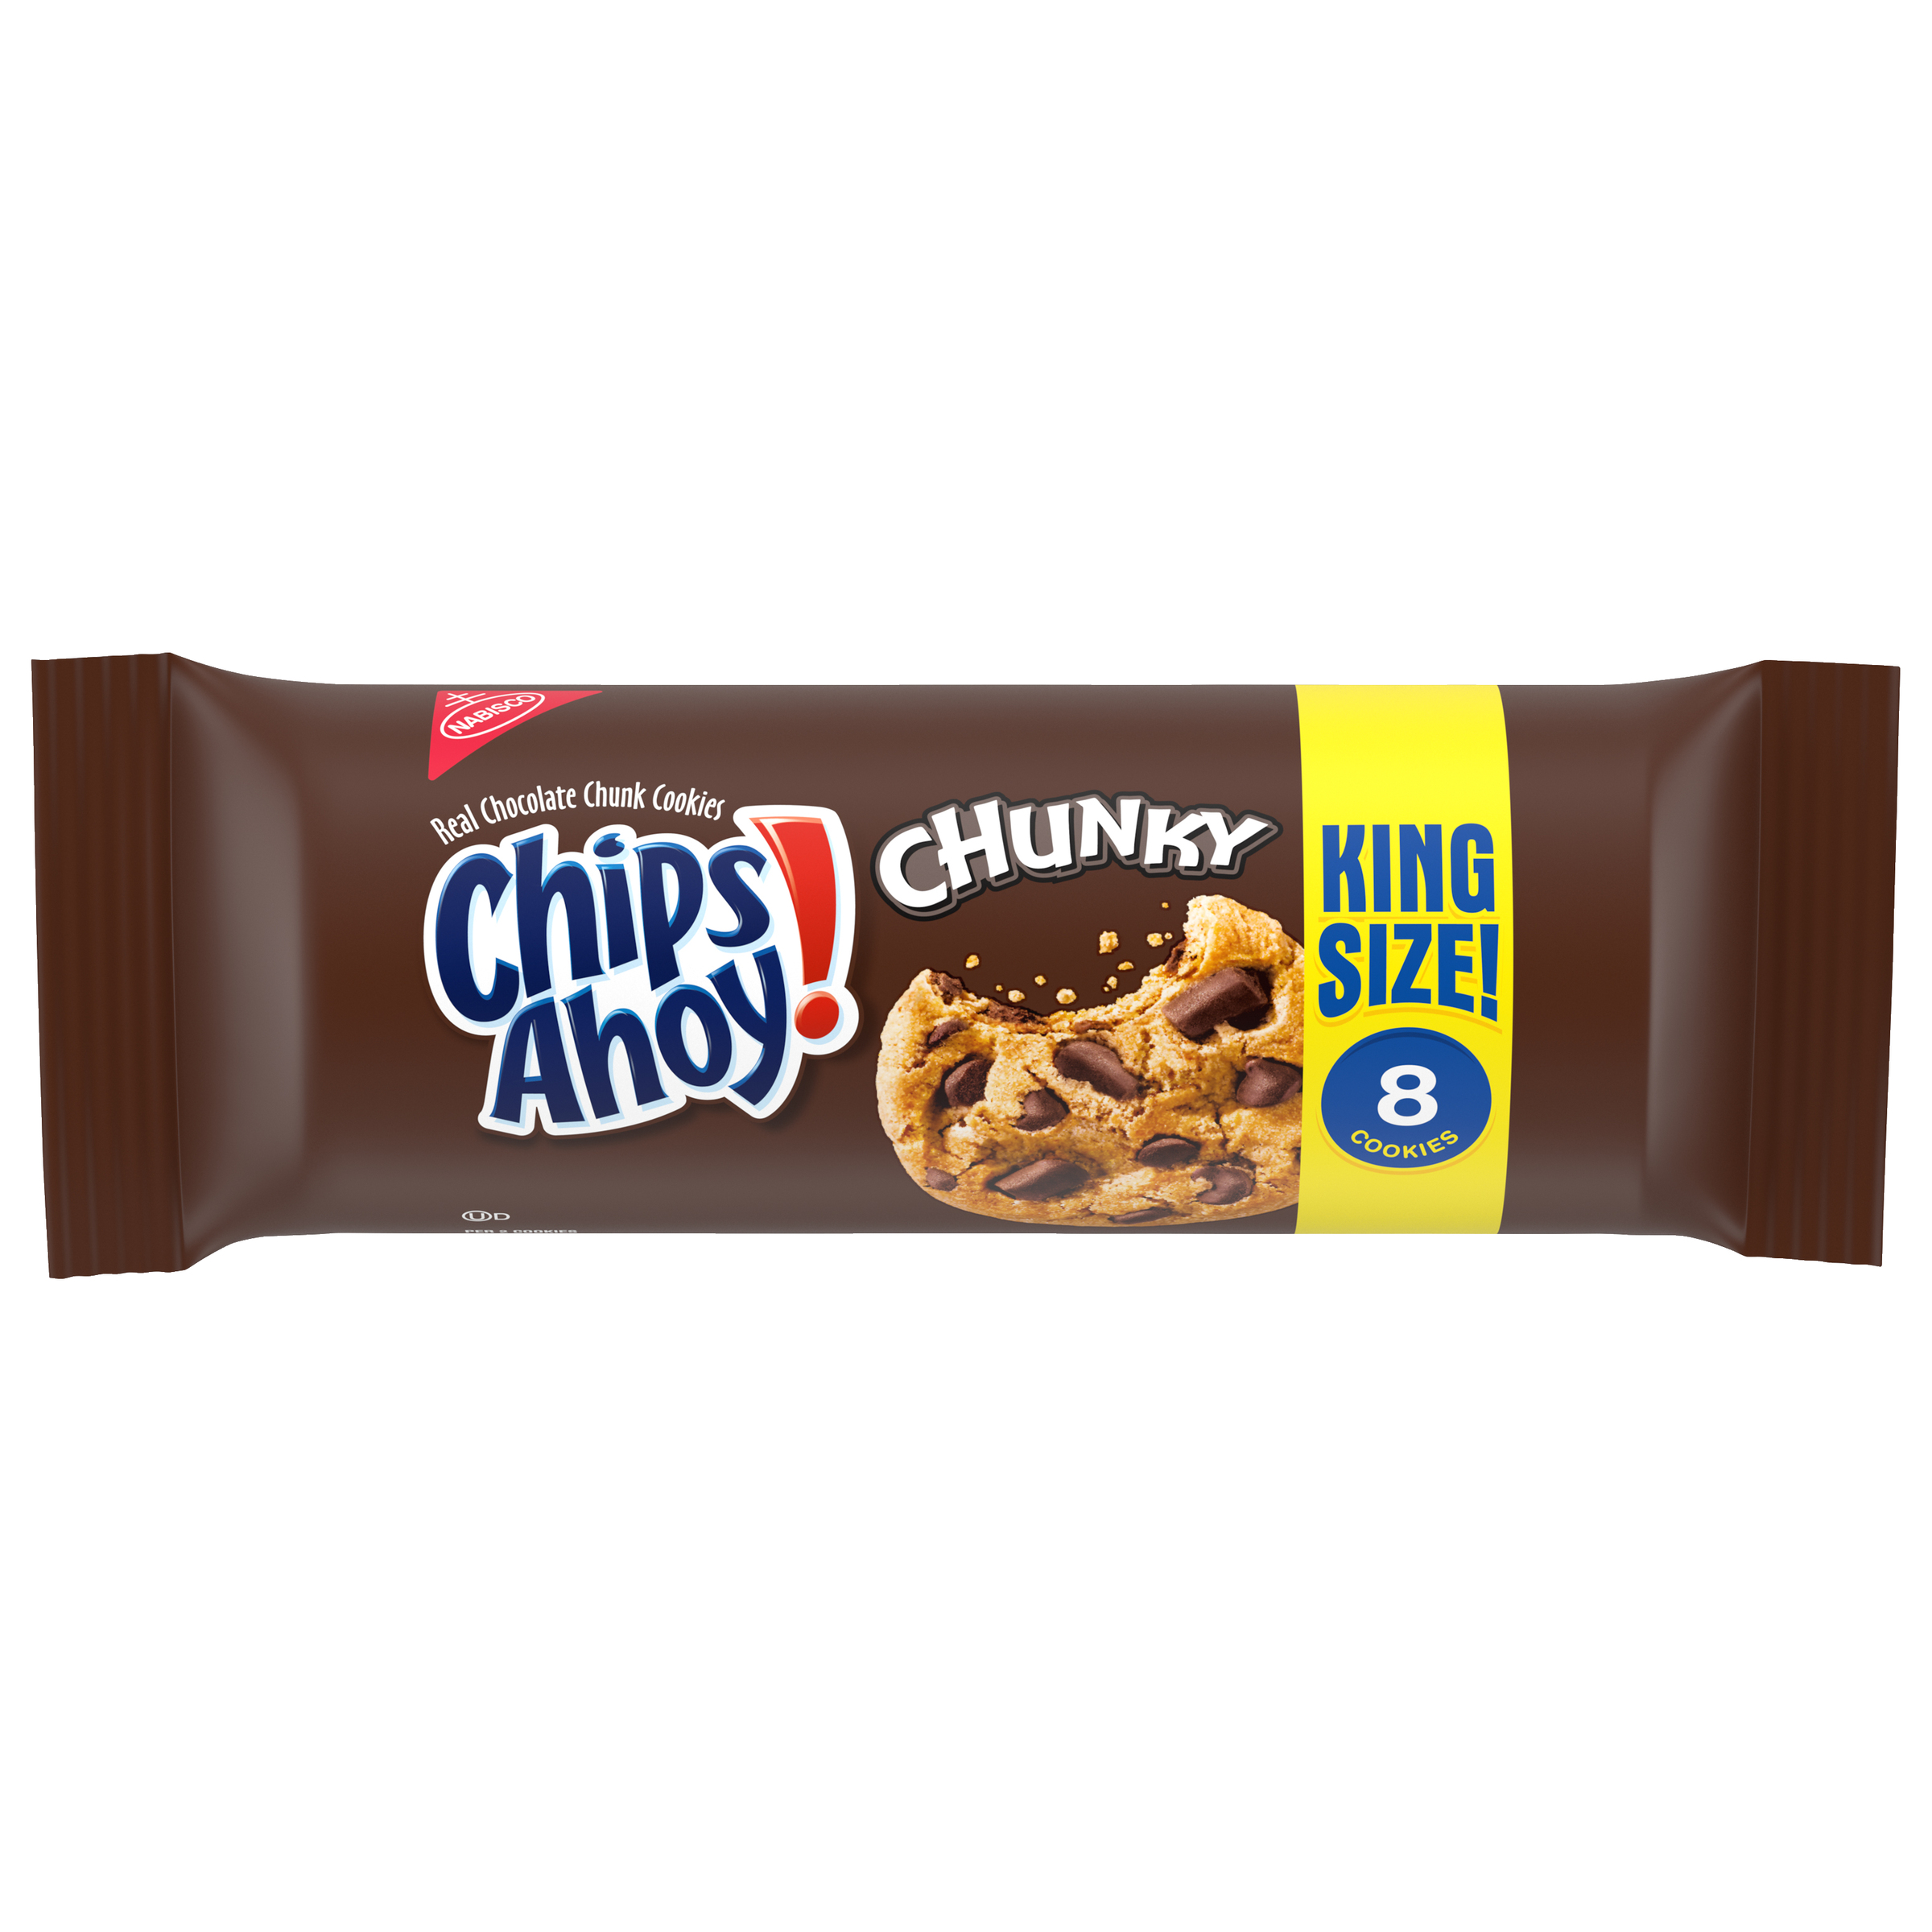 CHIPS AHOY! Chunk Chocolate Chip Cookies, King Size, 4.15 oz